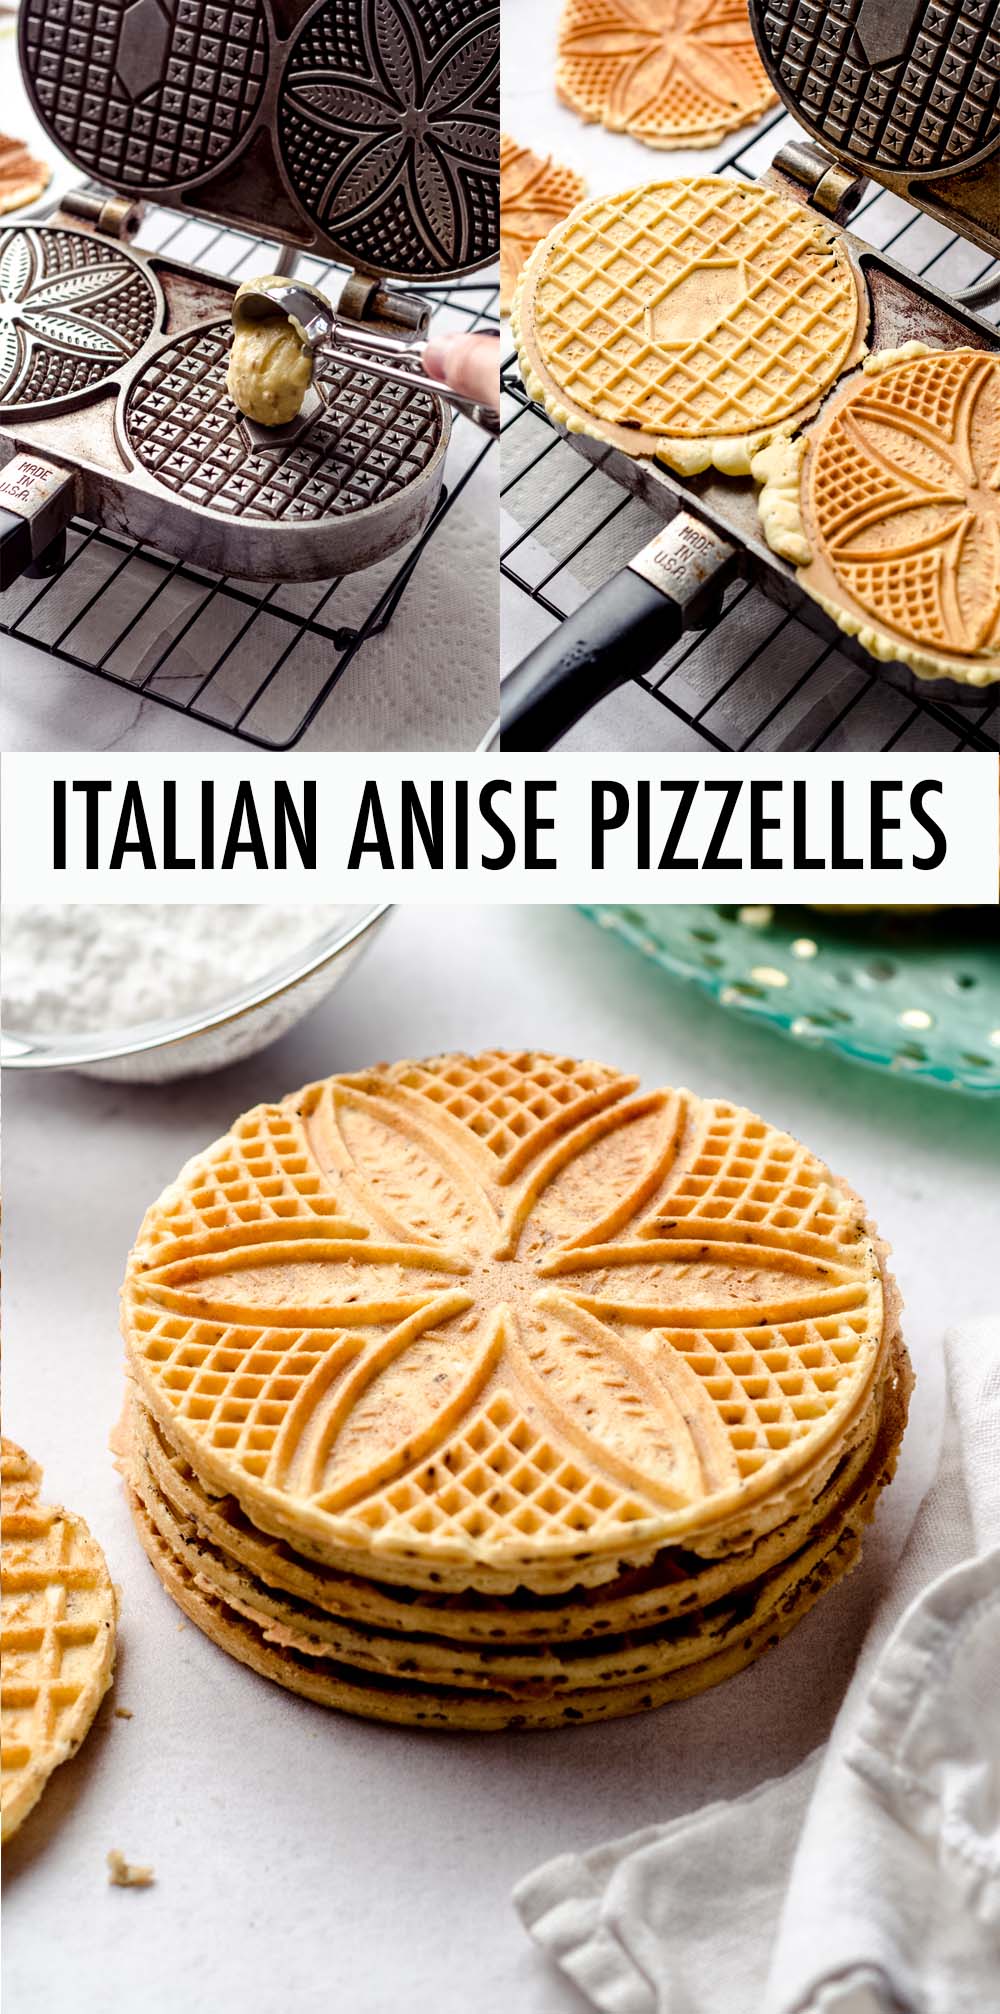 Thin Italian waffle cookies featuring optional anise flavoring for an authentic Italian treat. Perfect with a cup of coffee or espresso and a family favorite at Christmas time. Dust with powdered sugar for an extra sweet touch! via @frshaprilflours